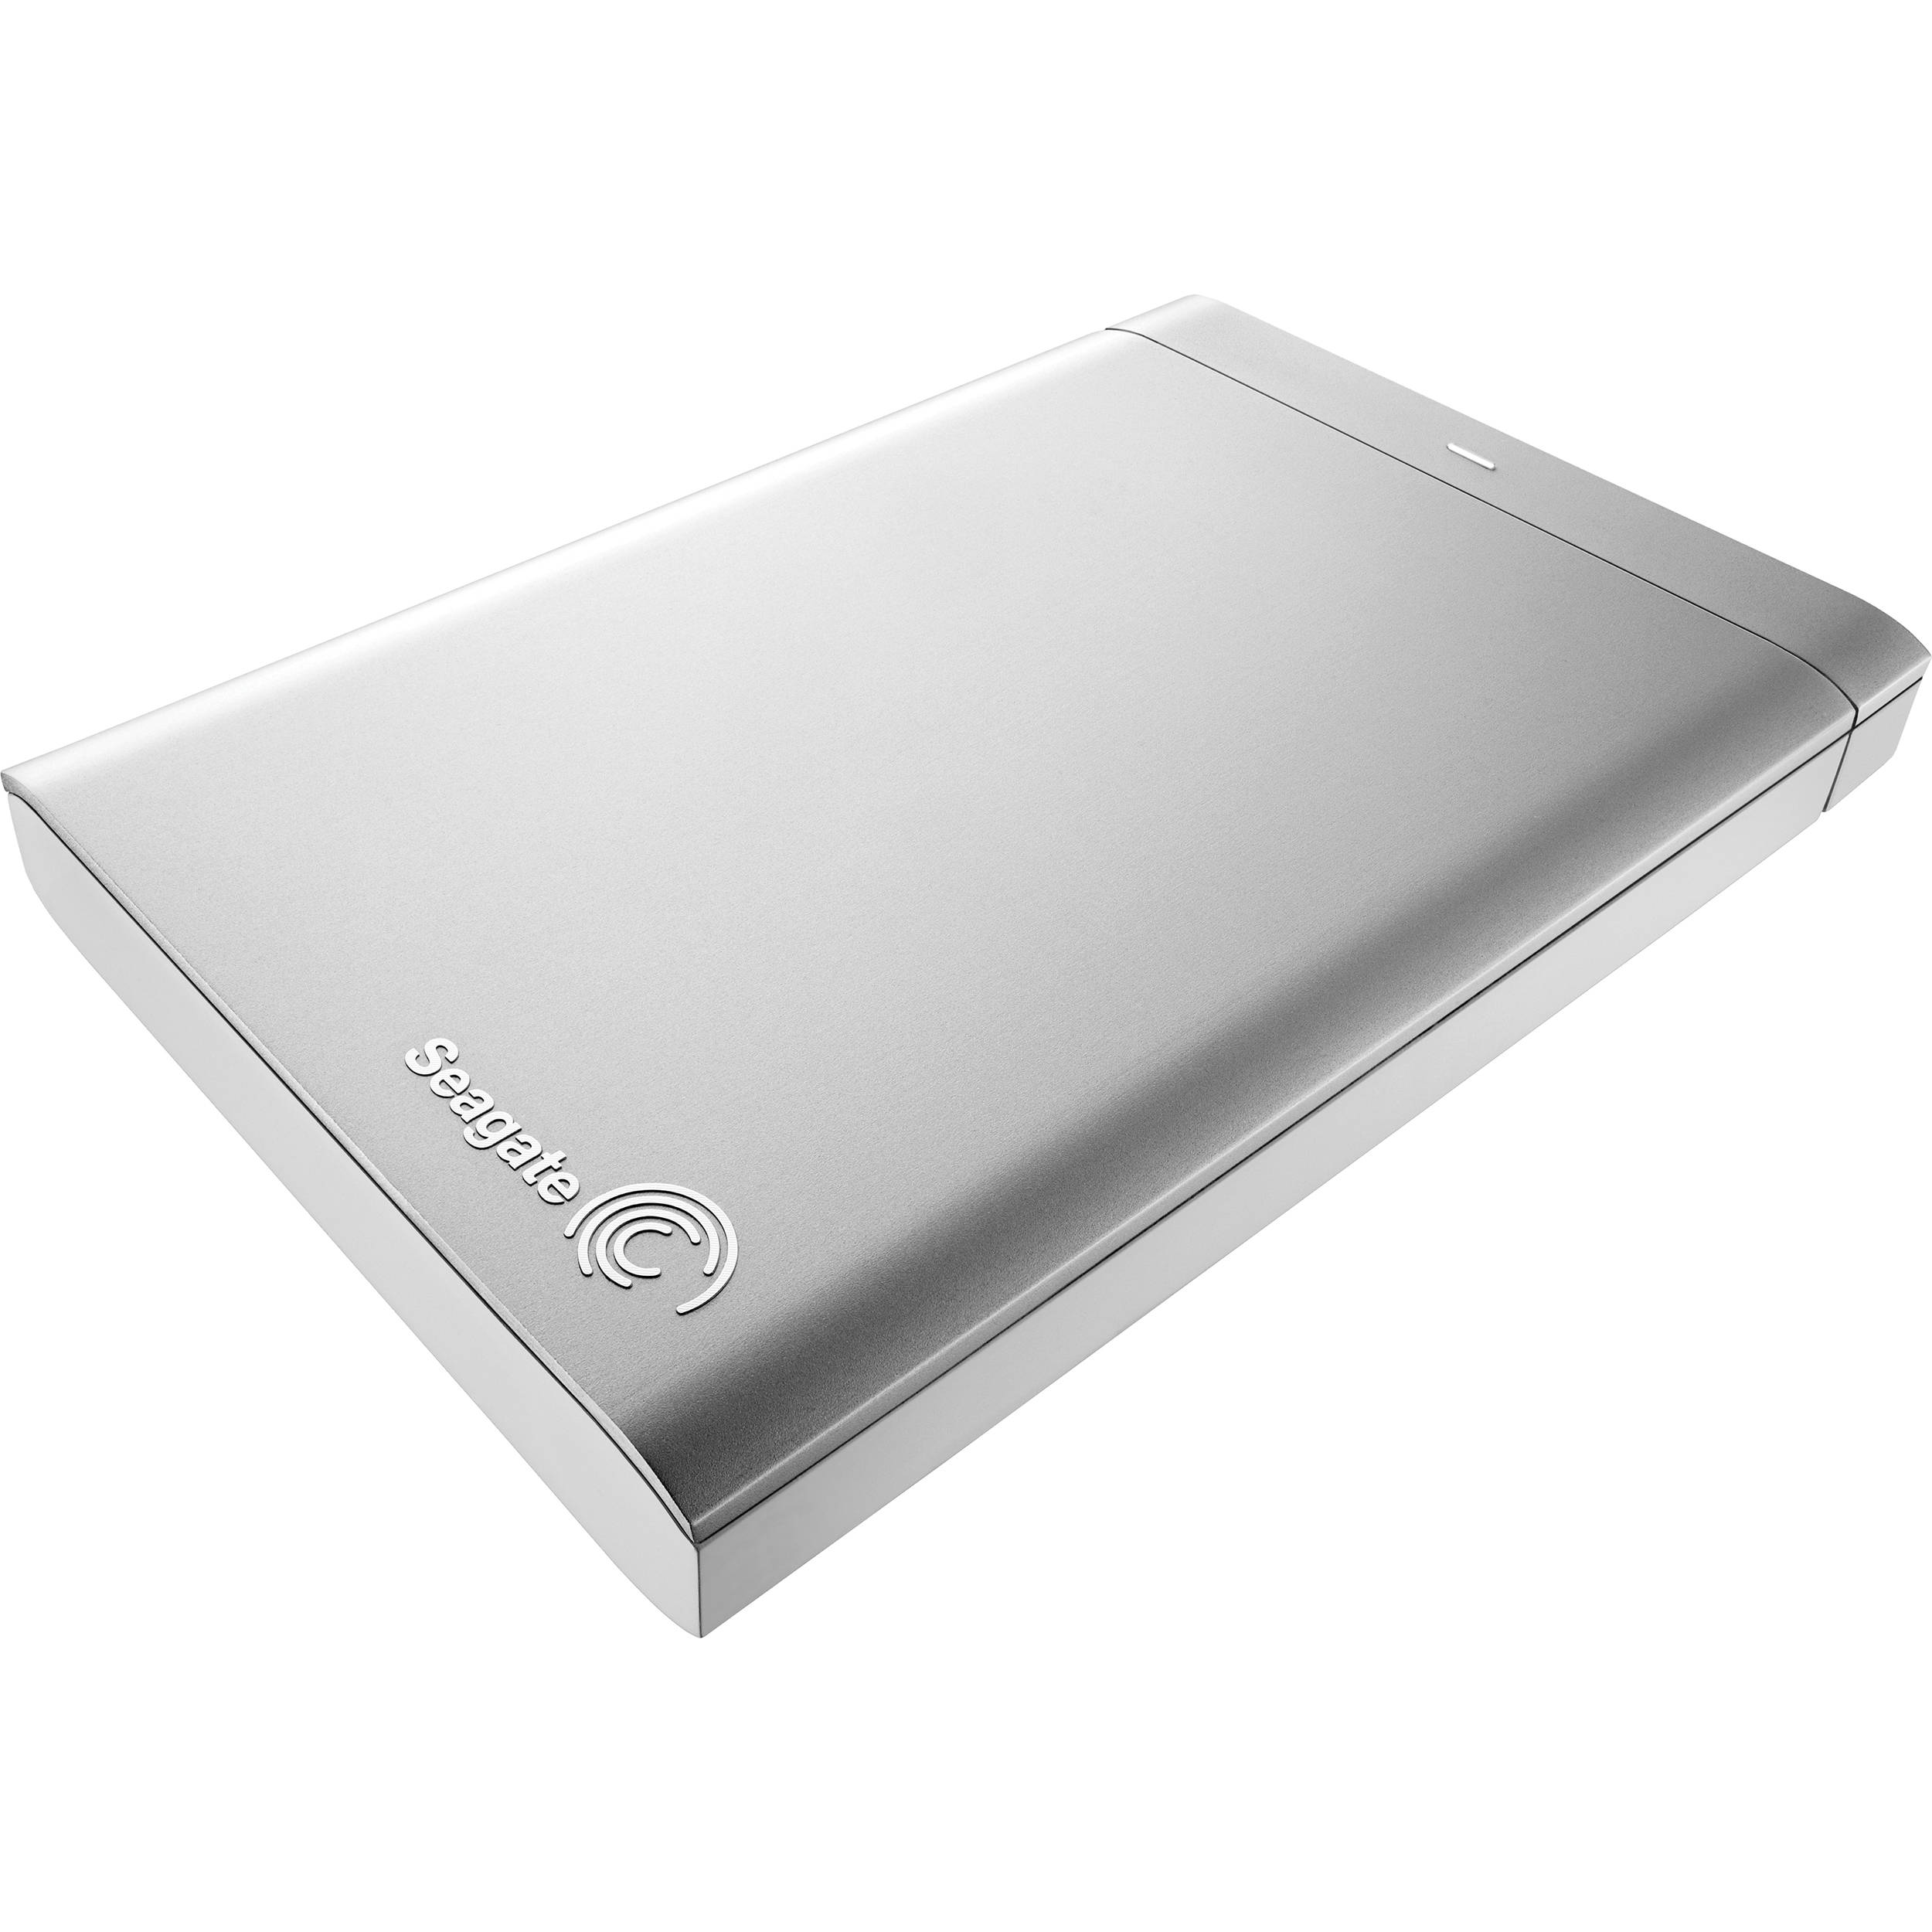 use backup plus seagate portable drive for mac as external storage